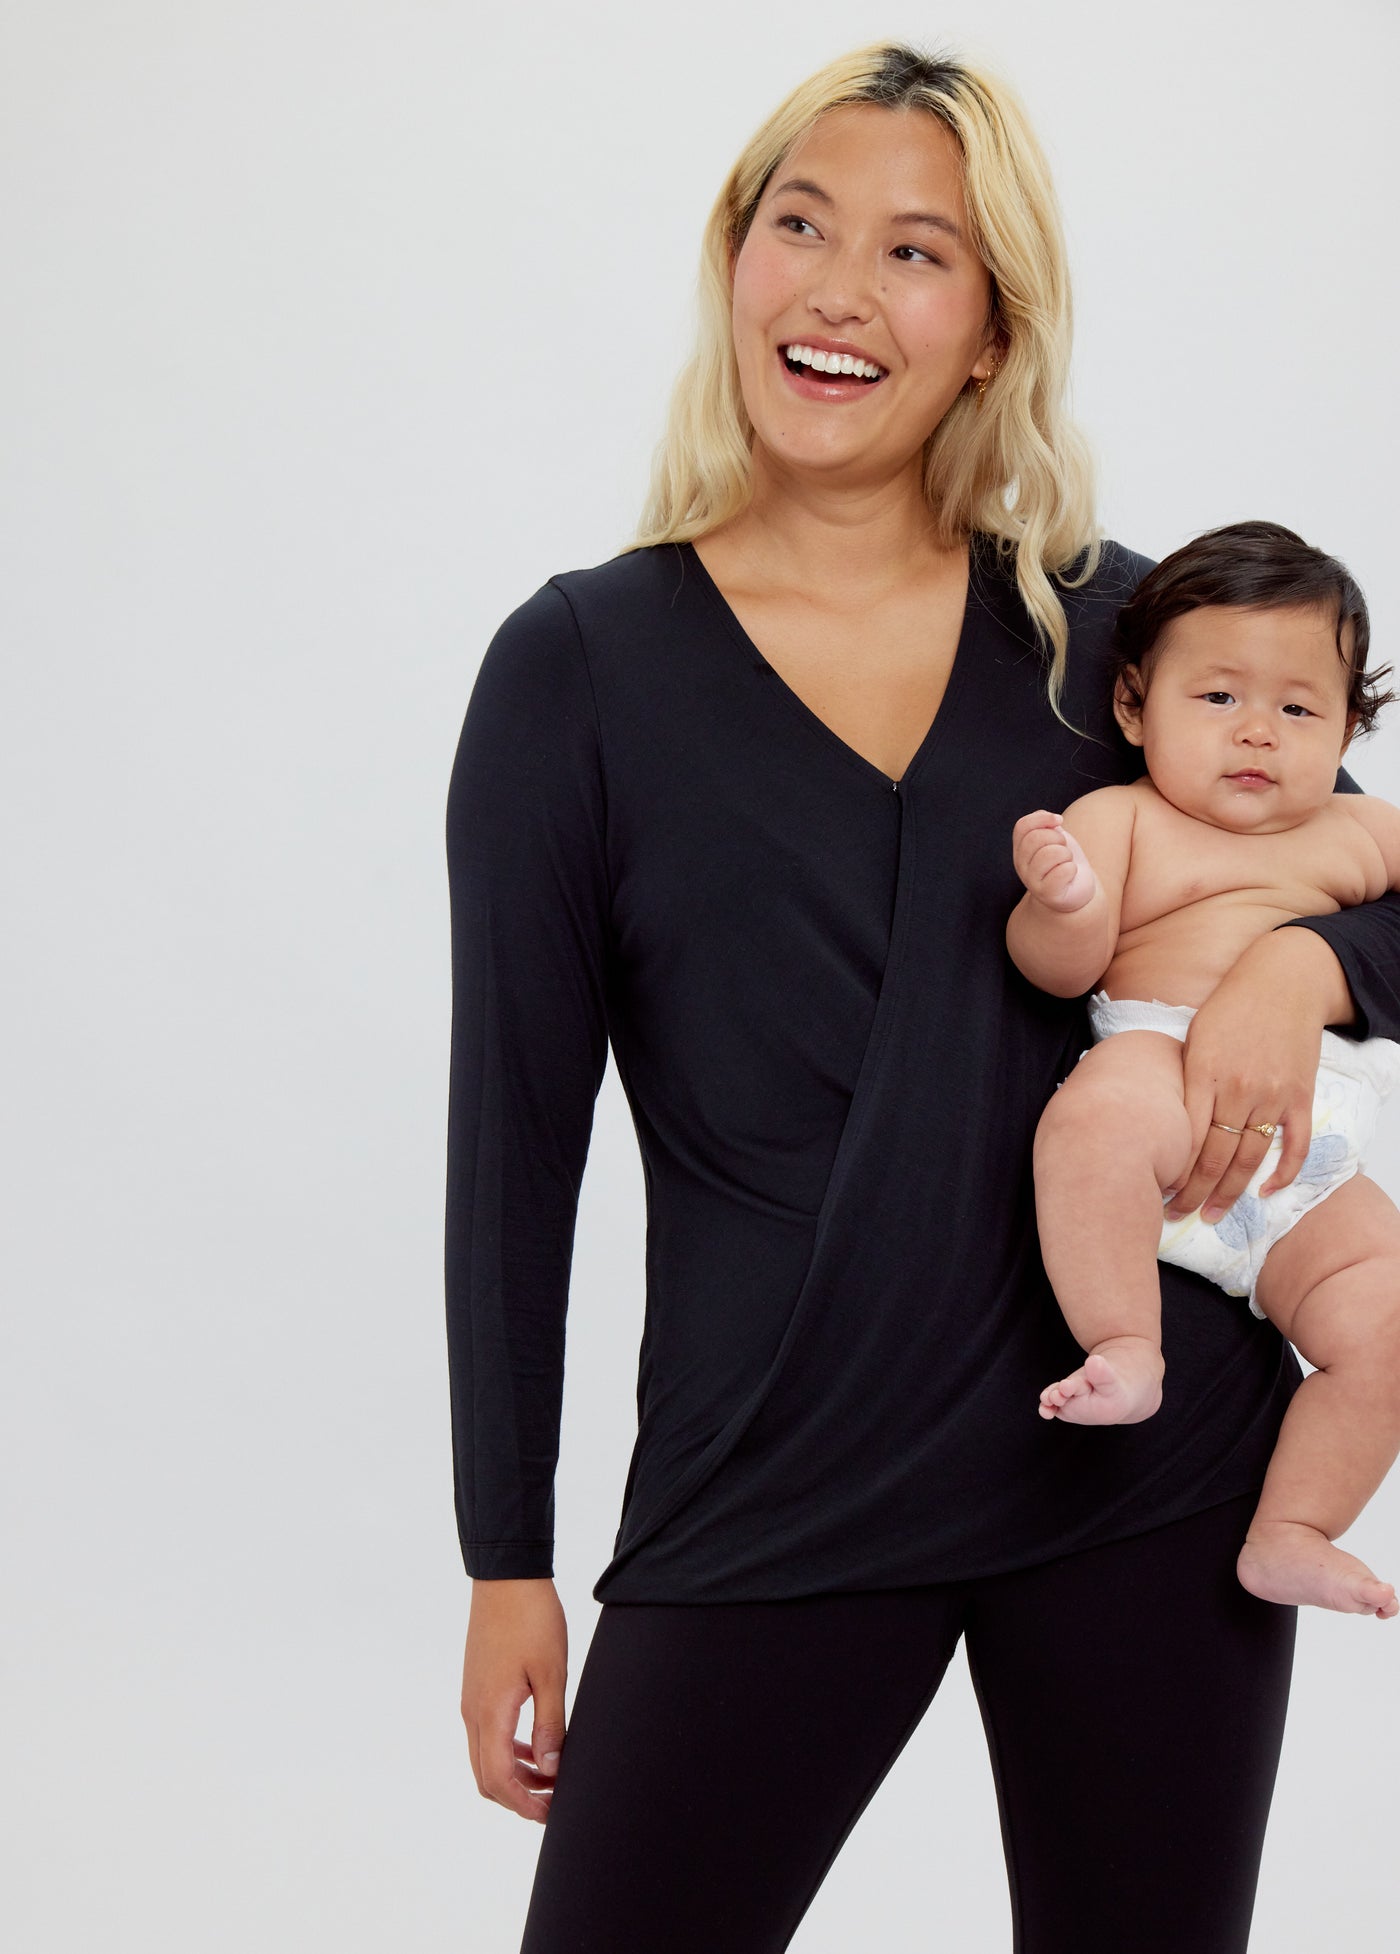 Allie is 5'6", 5 months postpartum, and wearing a size small||Black